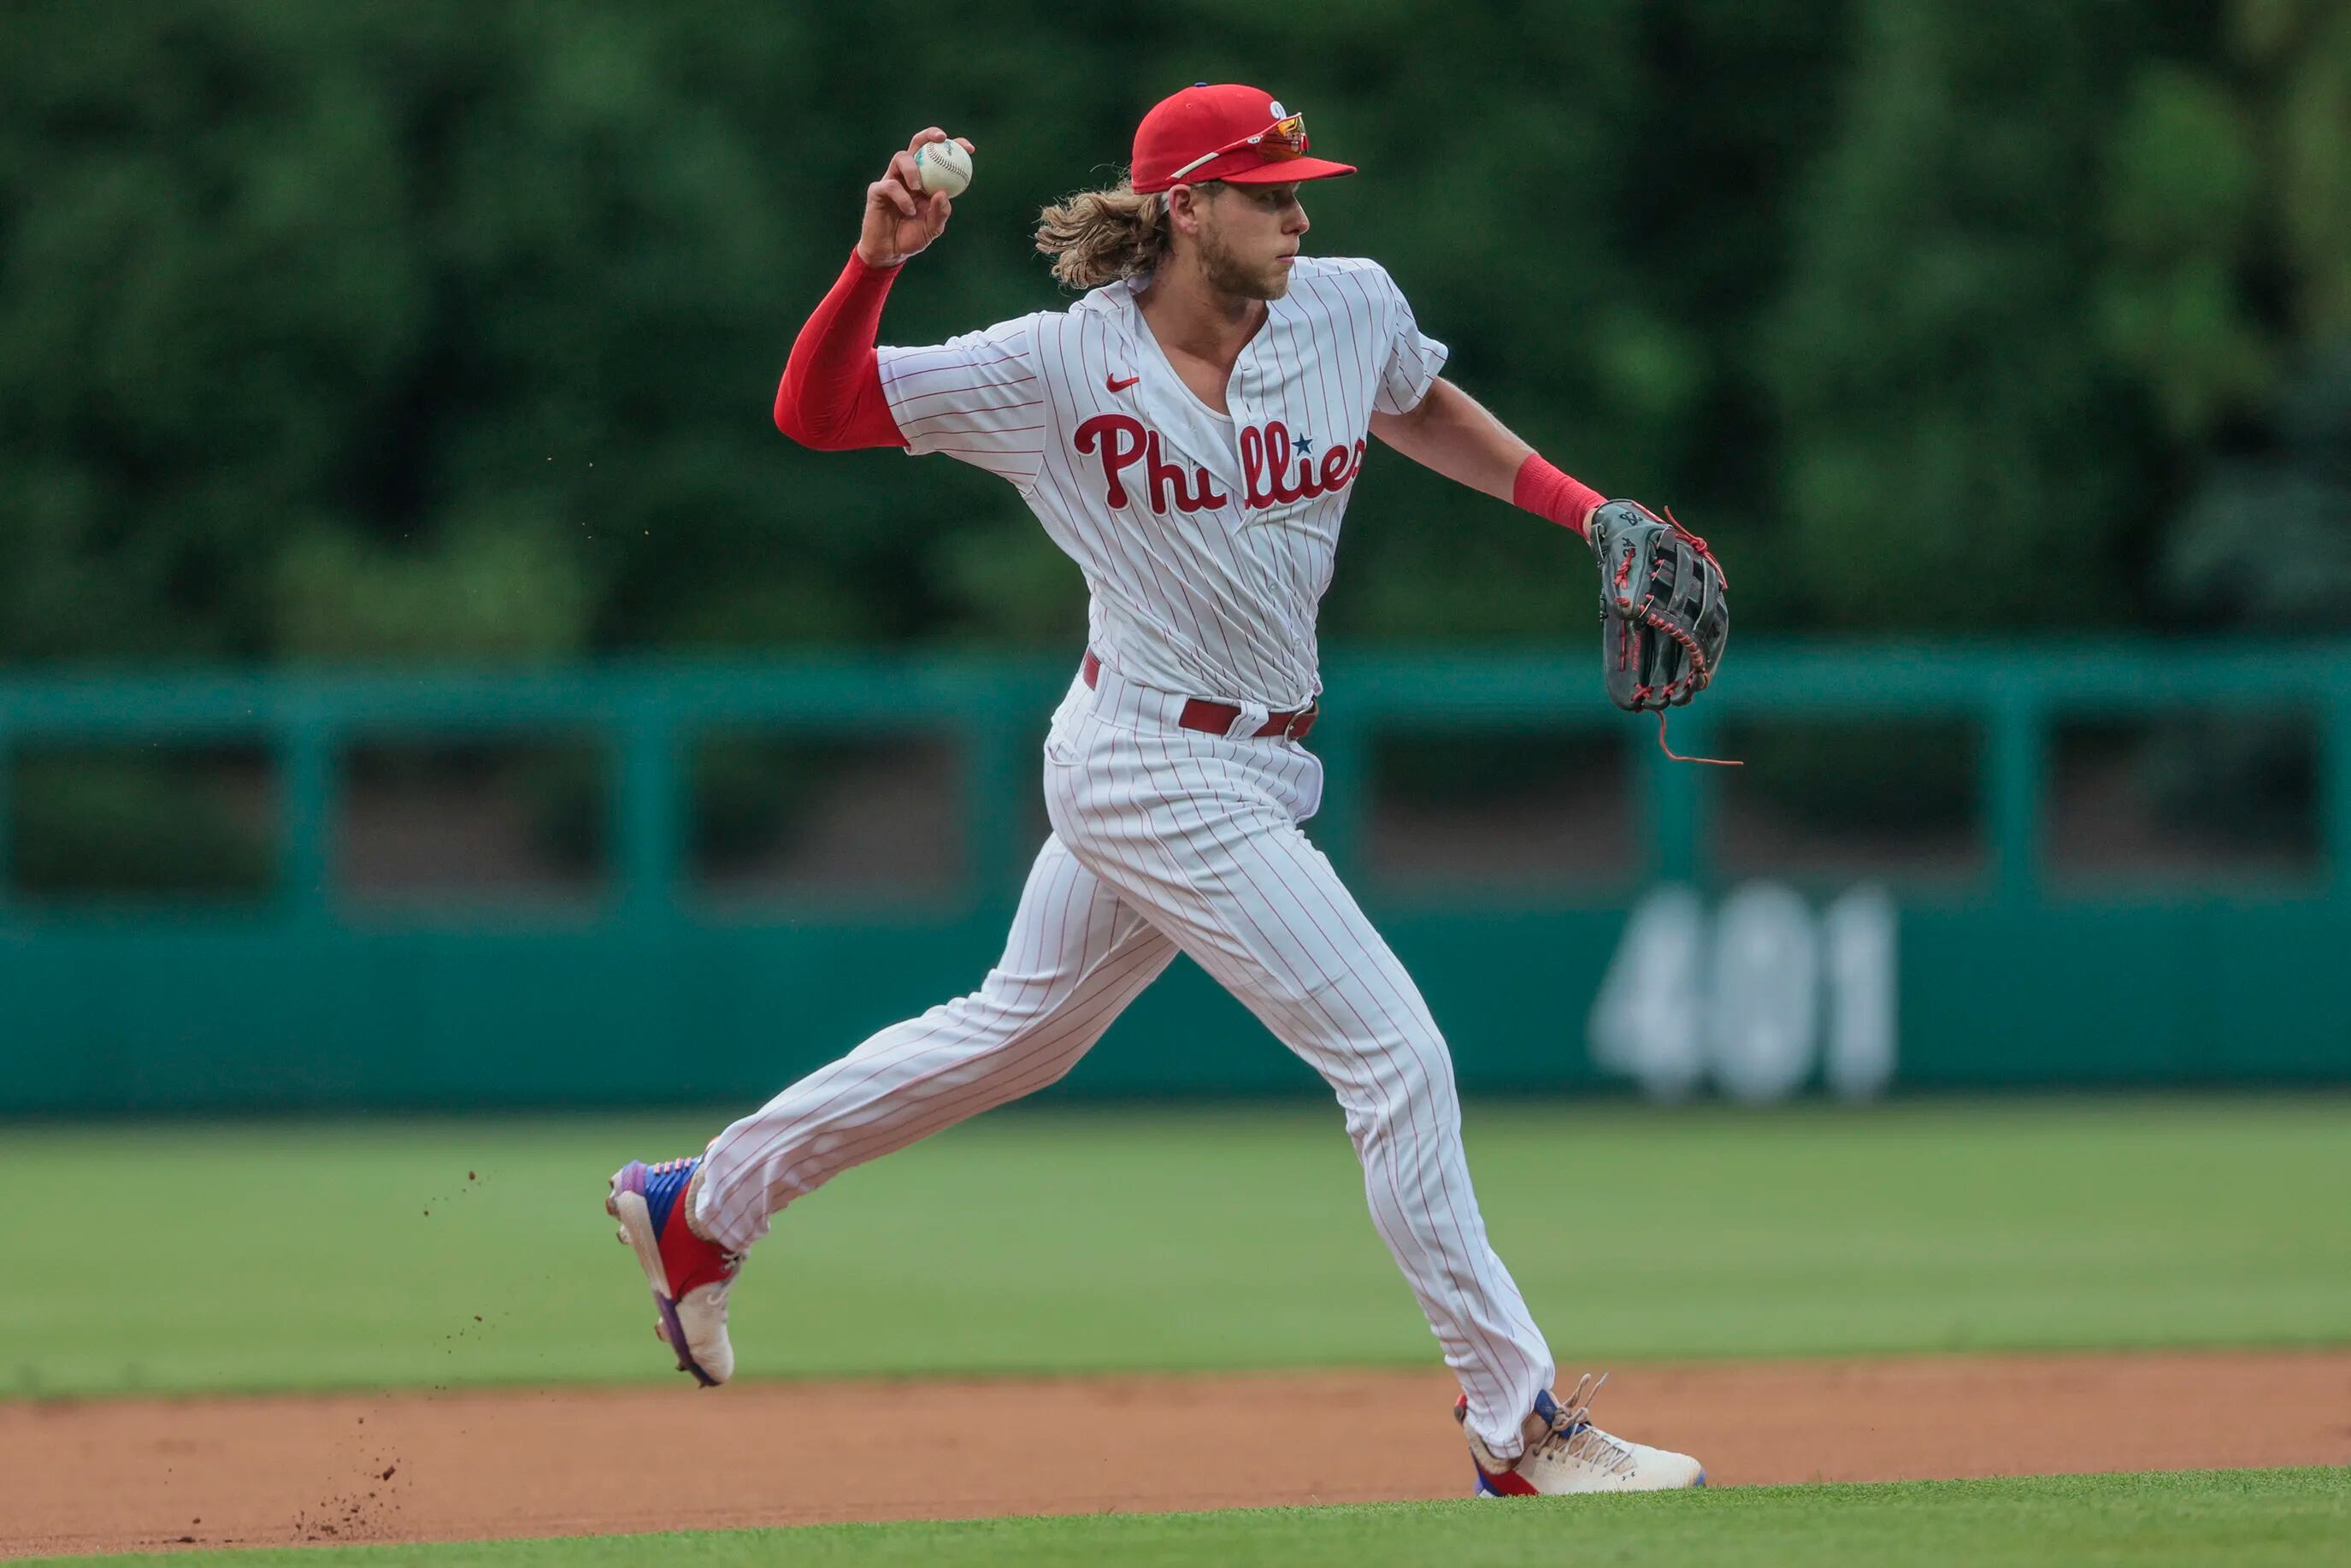 Photos from the Phillies' July 4th loss to the Padres